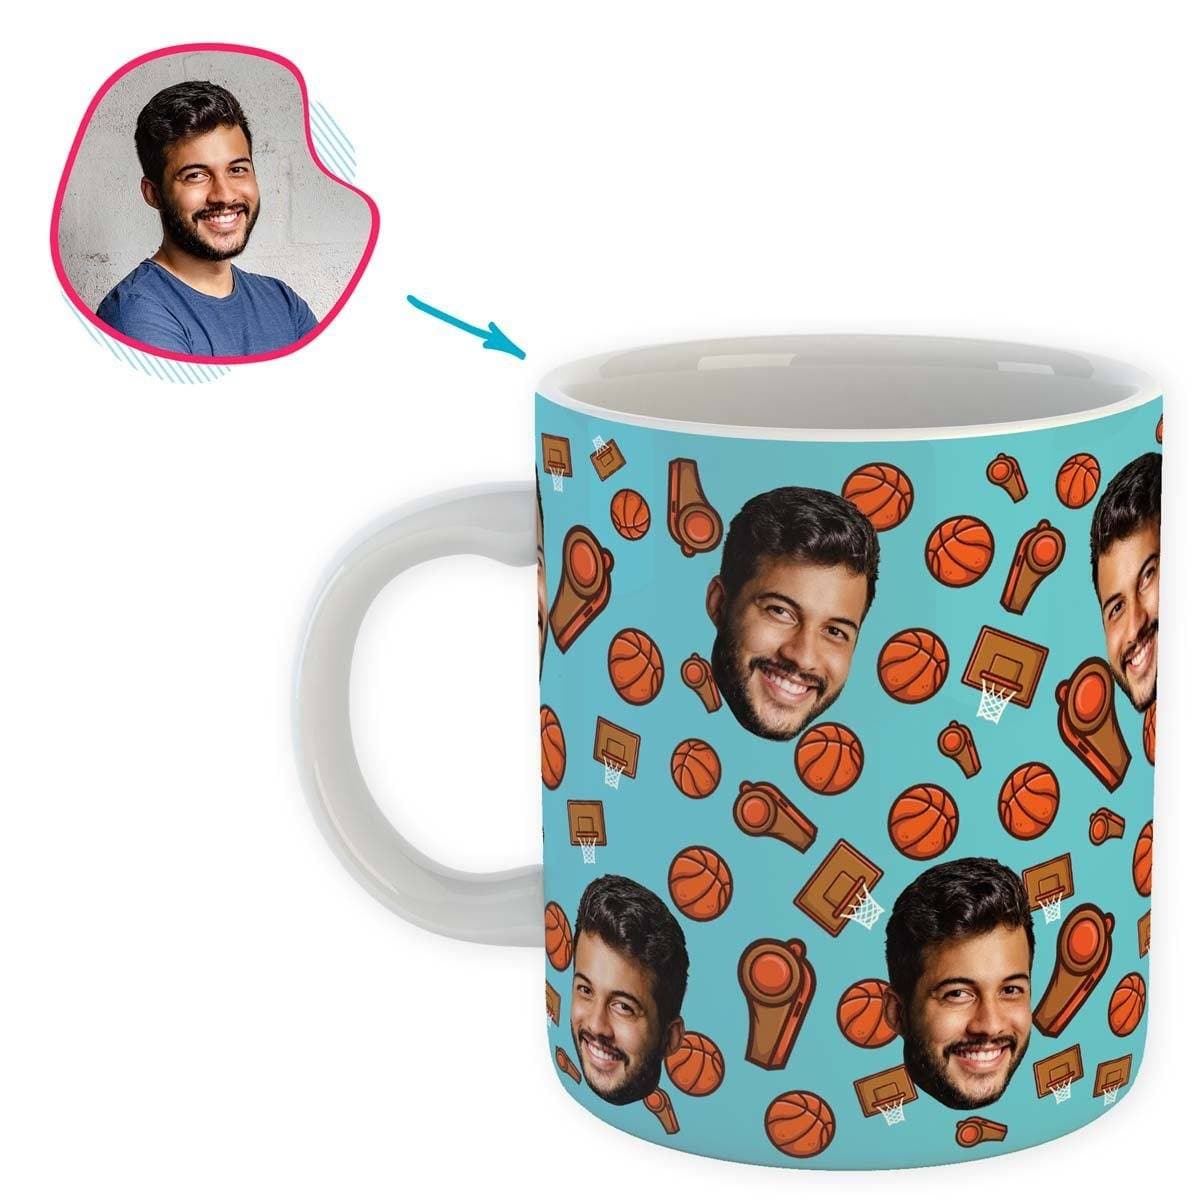 blue Basketball mug personalized with photo of face printed on it